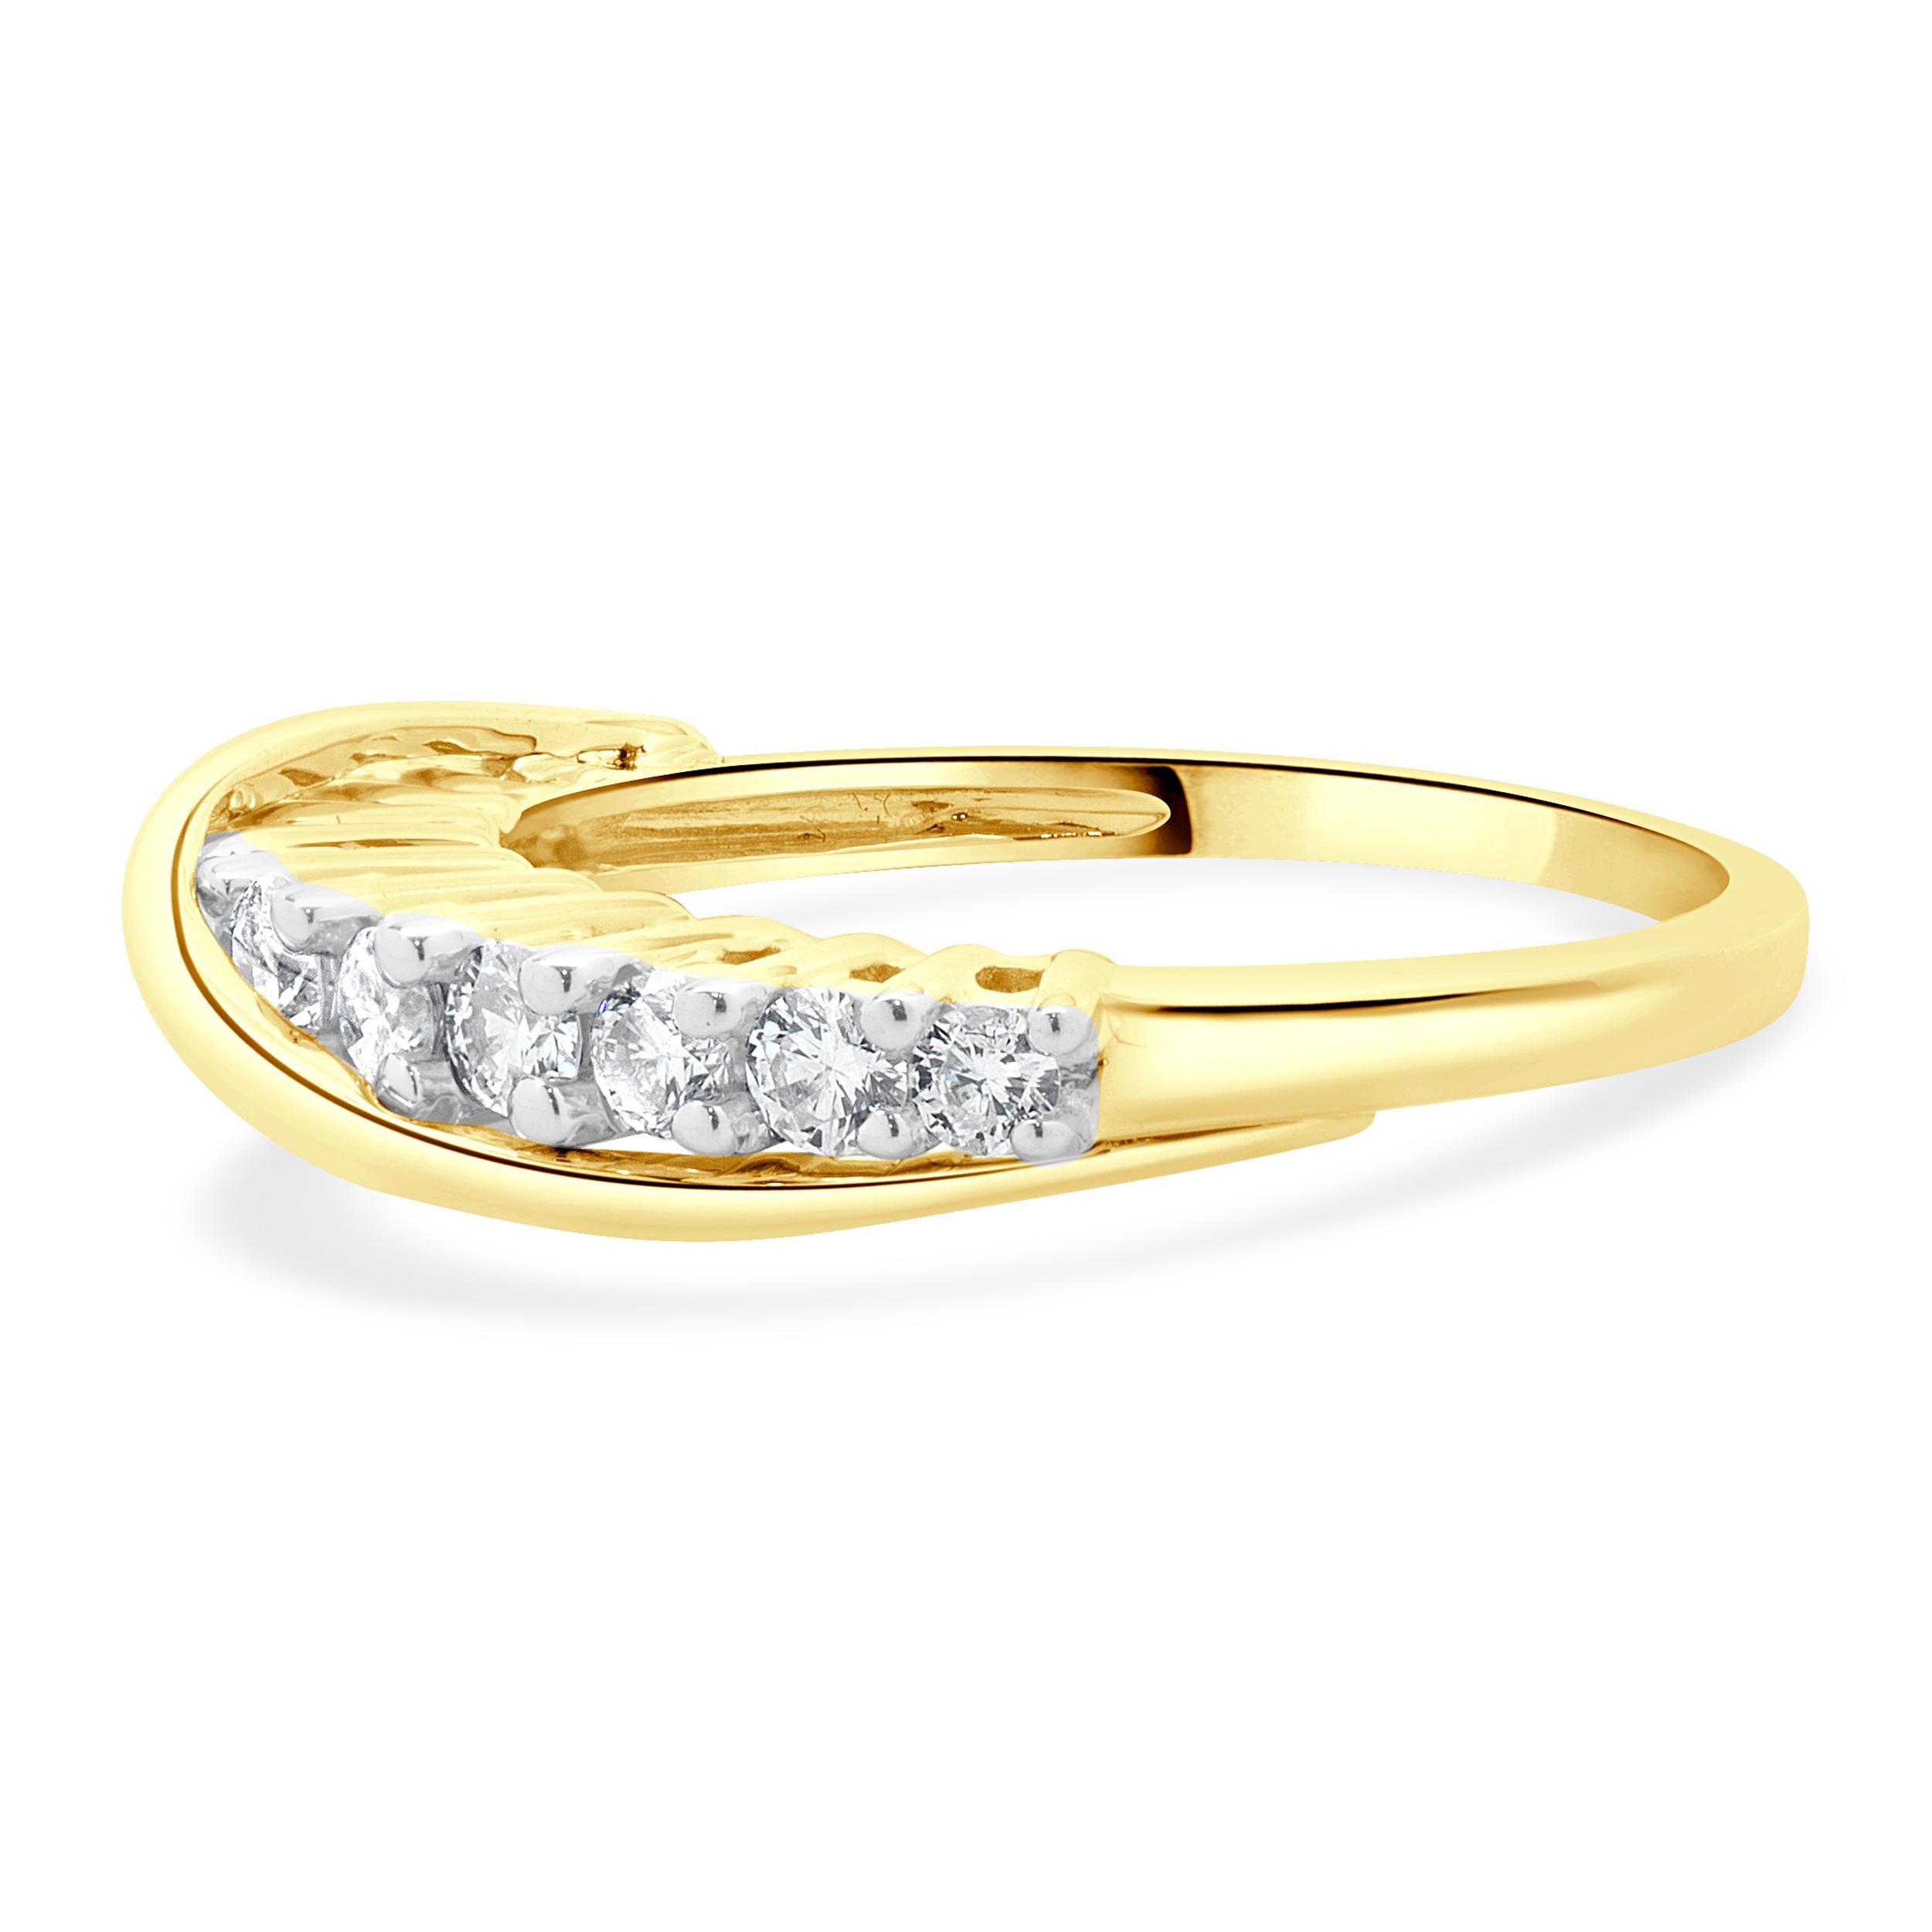 Designer: Custom
Material: 14K yellow gold
Diamonds: 11 round brilliant cut = 0.22cttw
Color: G
Clarity: VS1-2
Size: 6 sizing available 
Dimensions: ring measures 2mm in width
Weight: 2.77 grams
